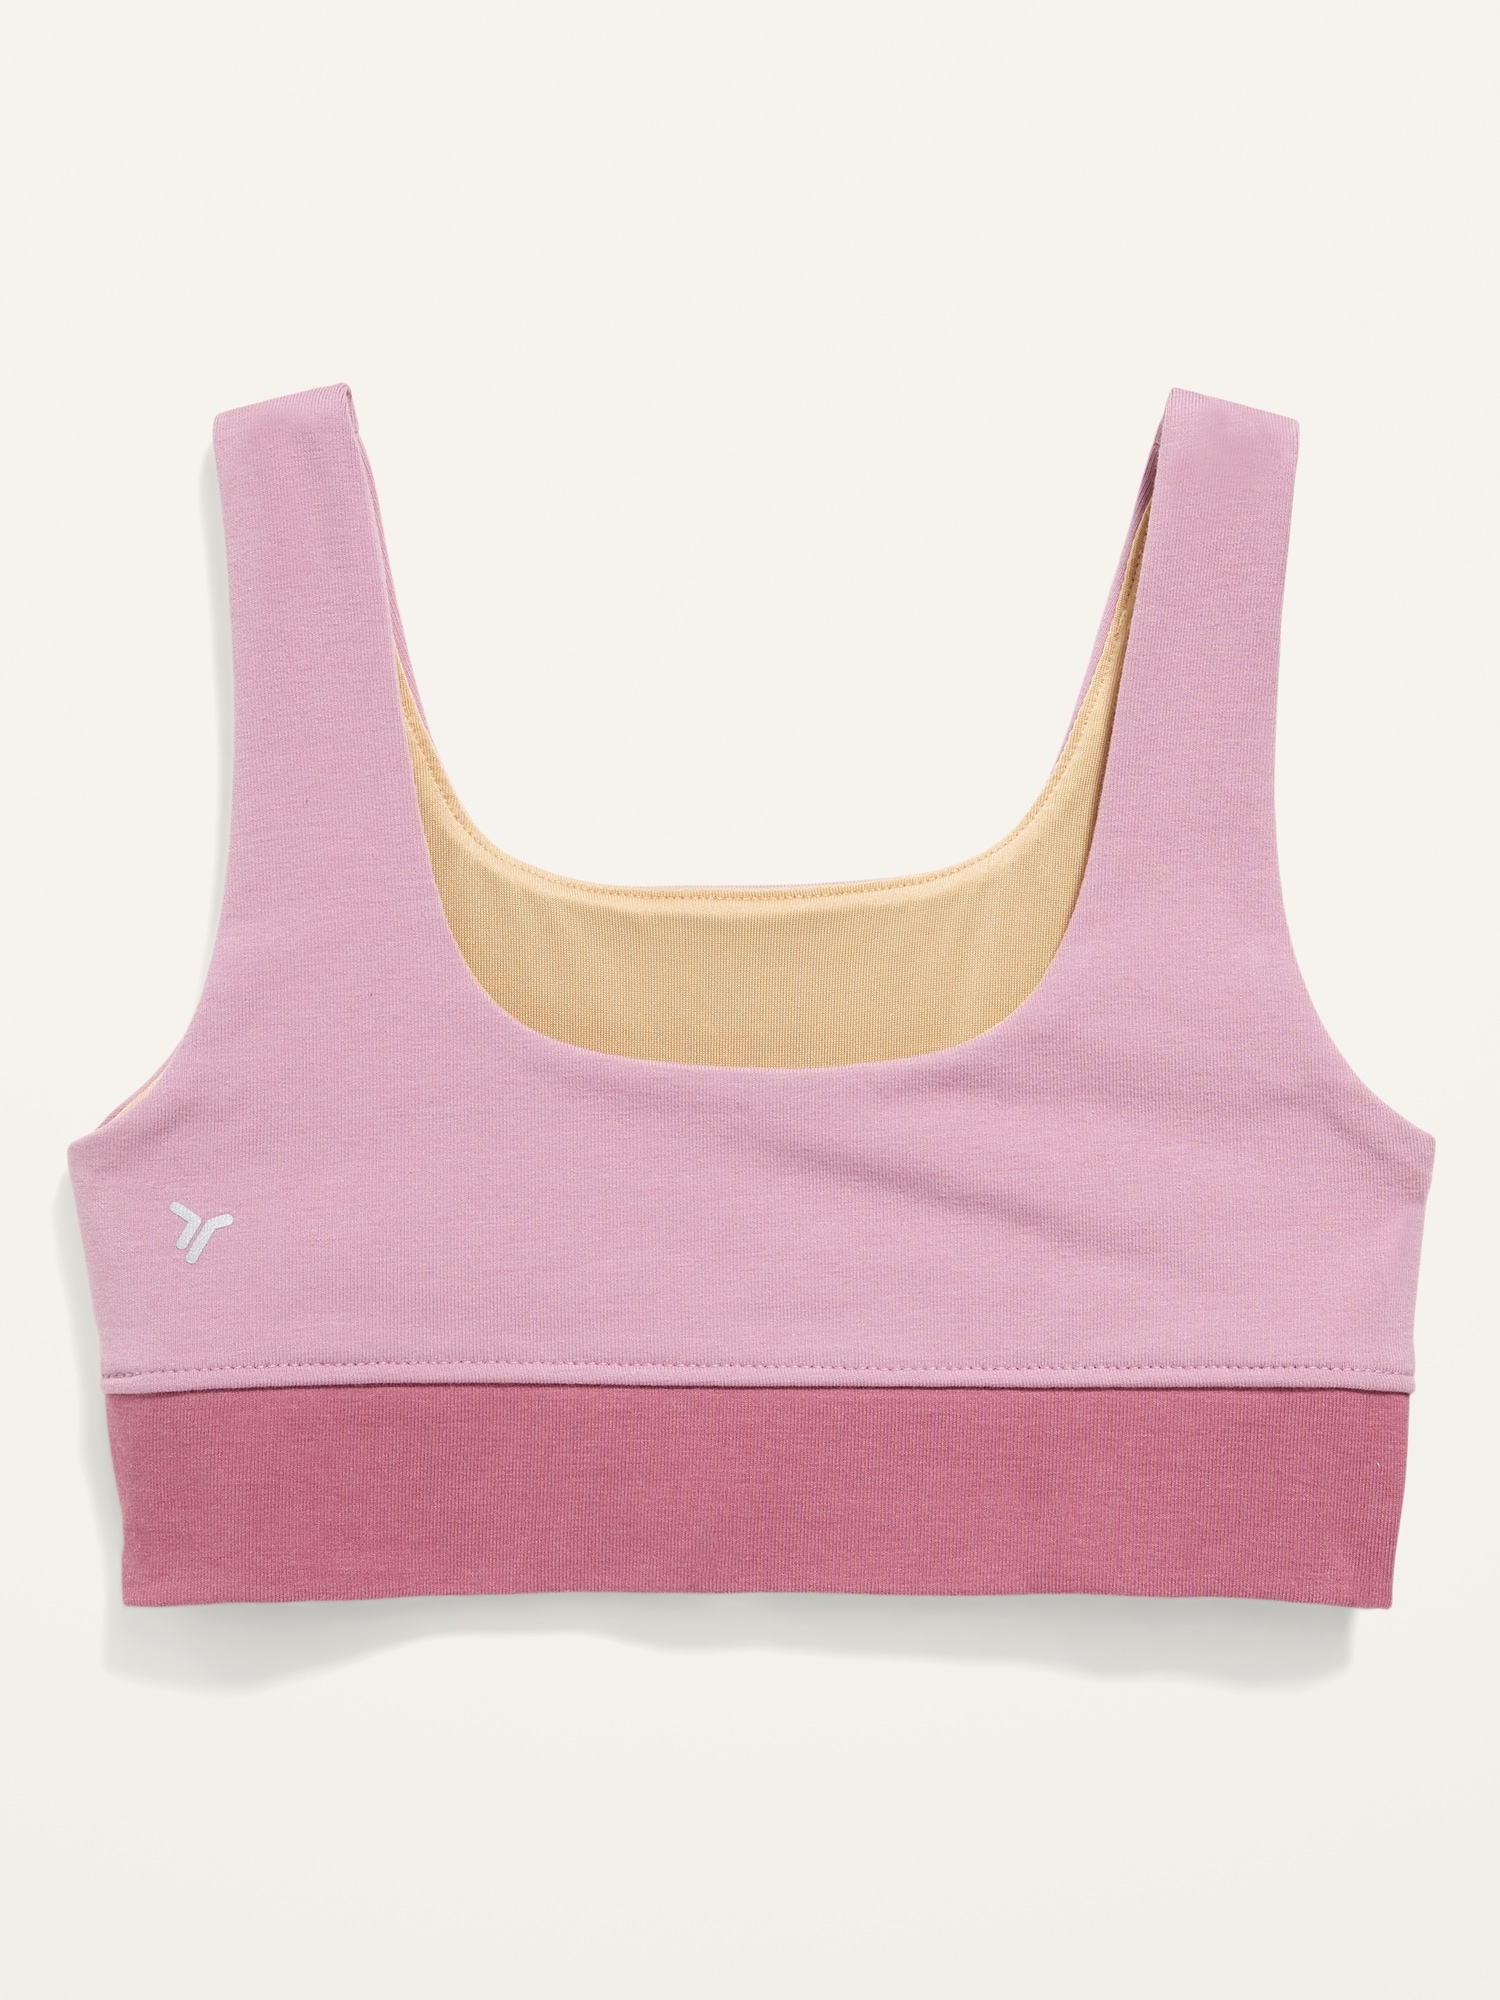 Old Navy, Accessories, Old Navy Active Toddler Girl Sports Bras Set Size 5  4 Nwt